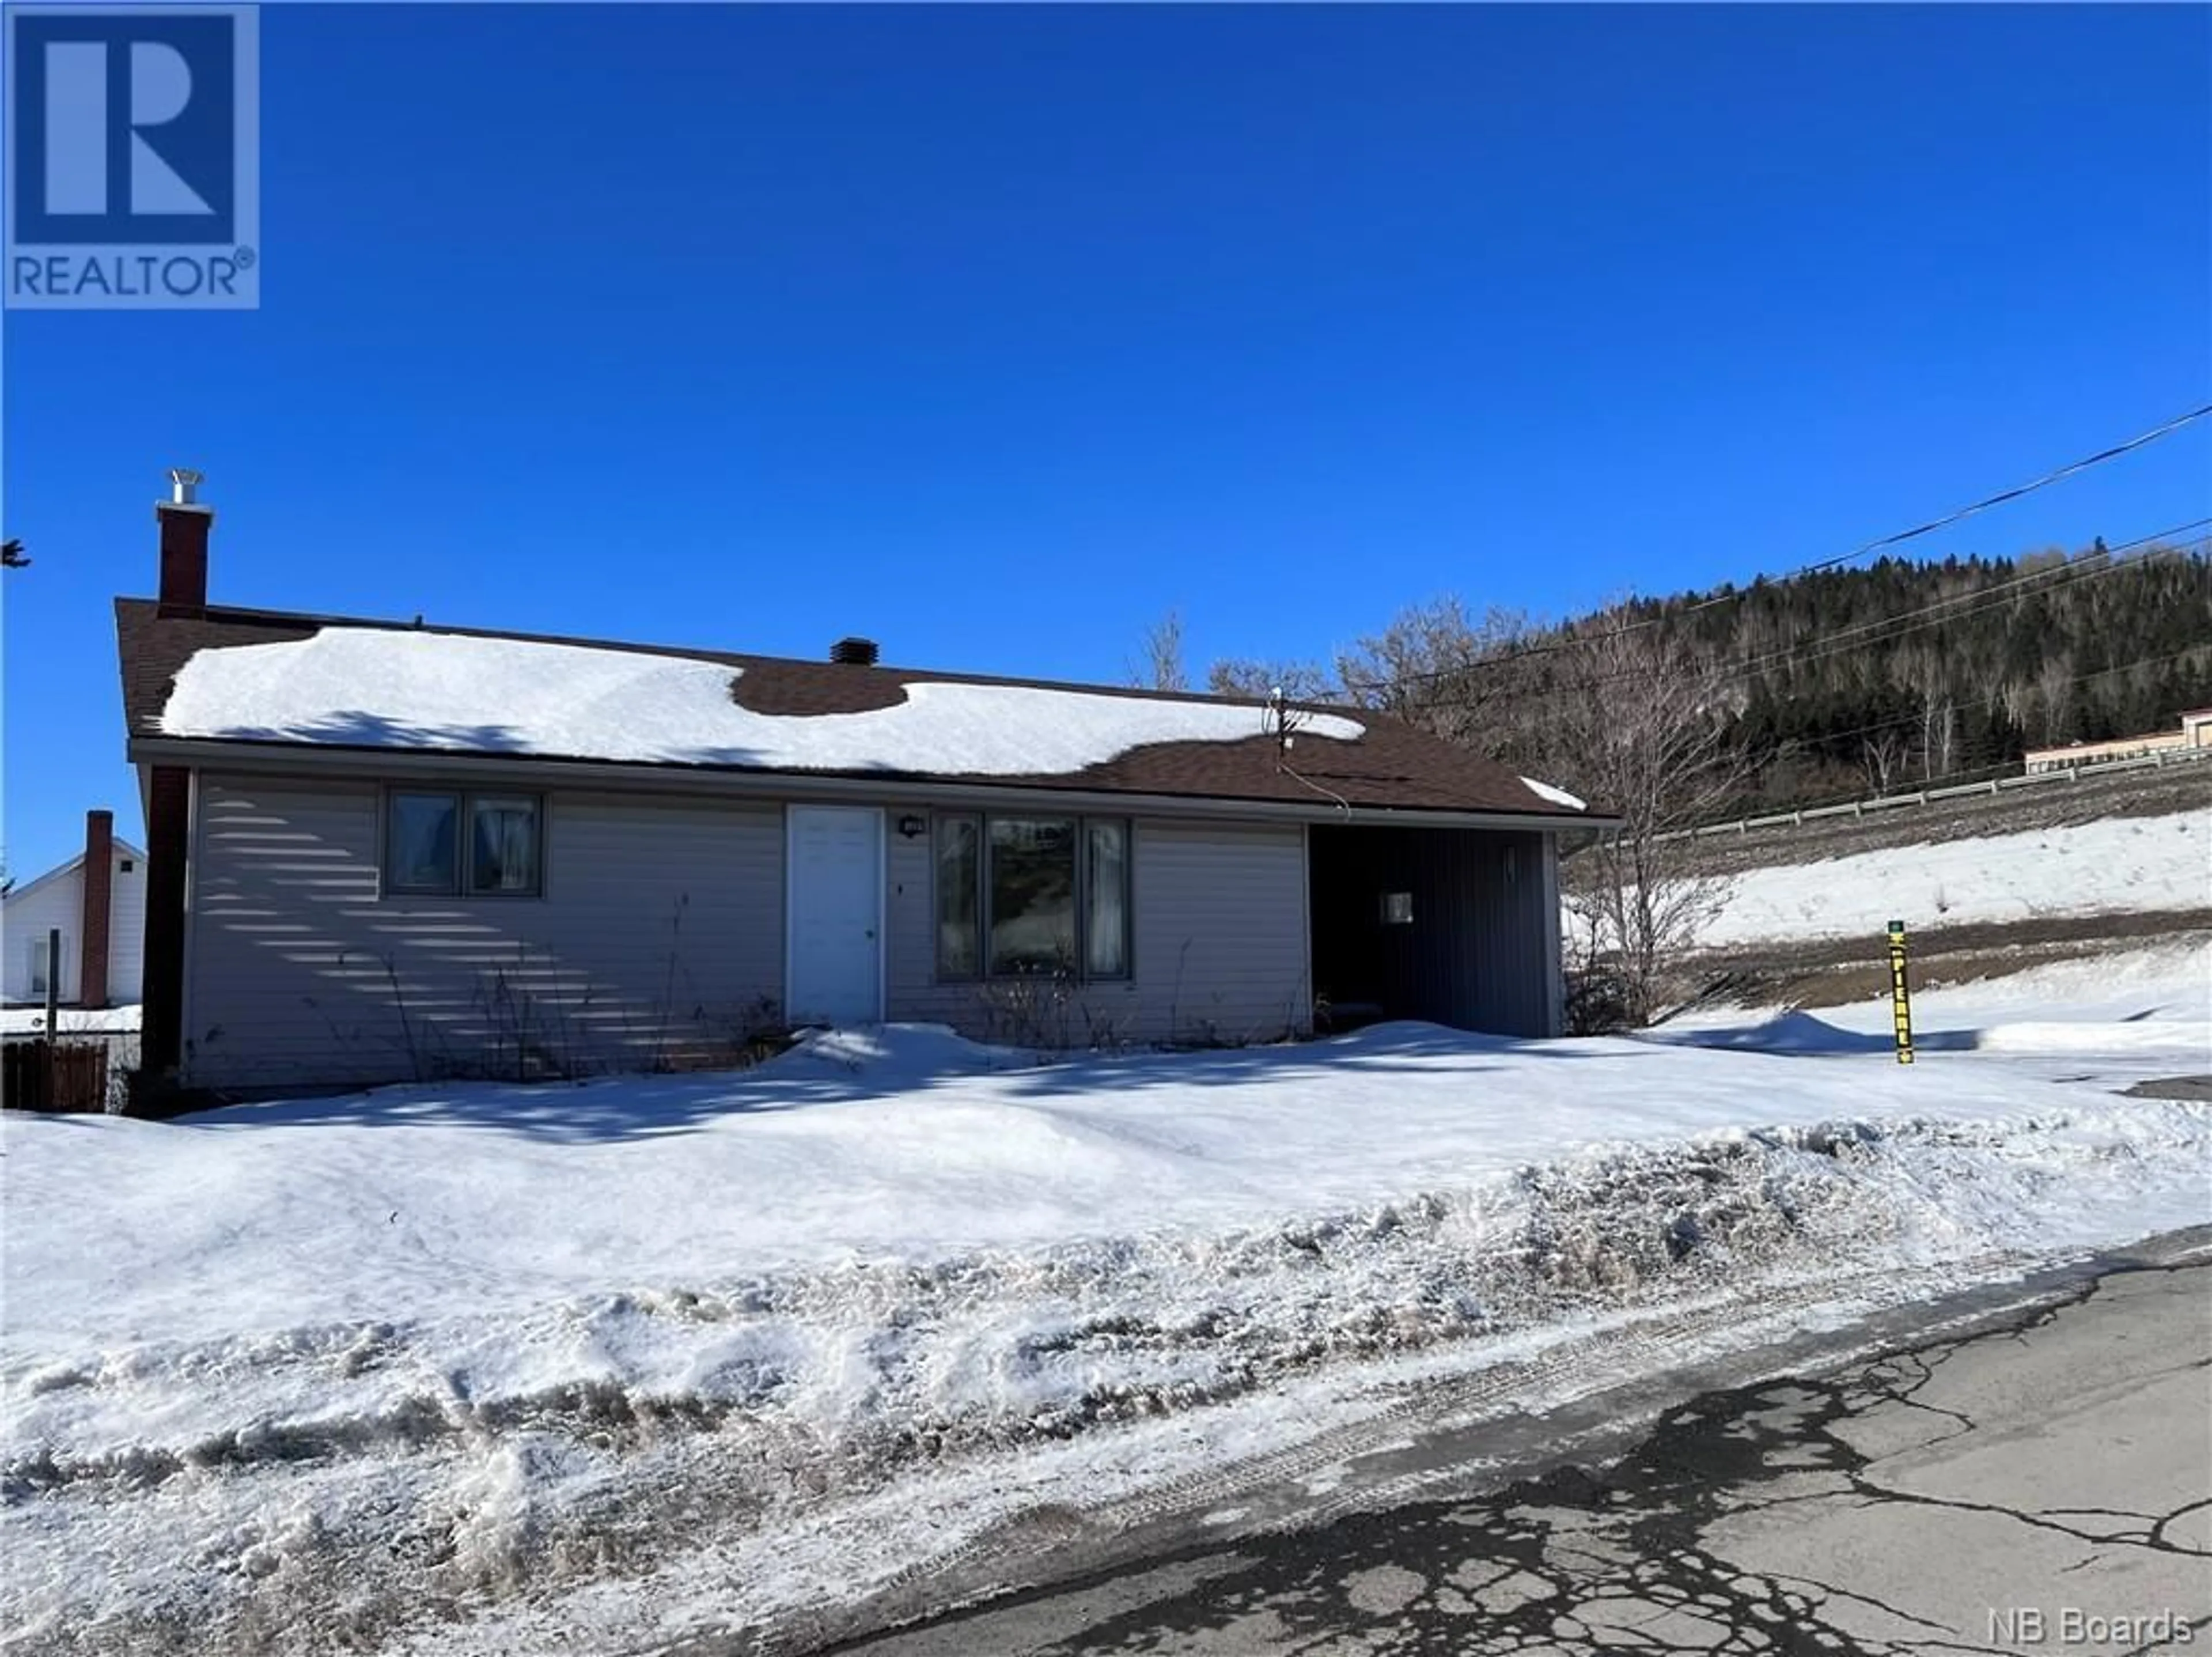 Home with unknown exterior material for 124 44th Avenue, Edmundston New Brunswick E3V3A3